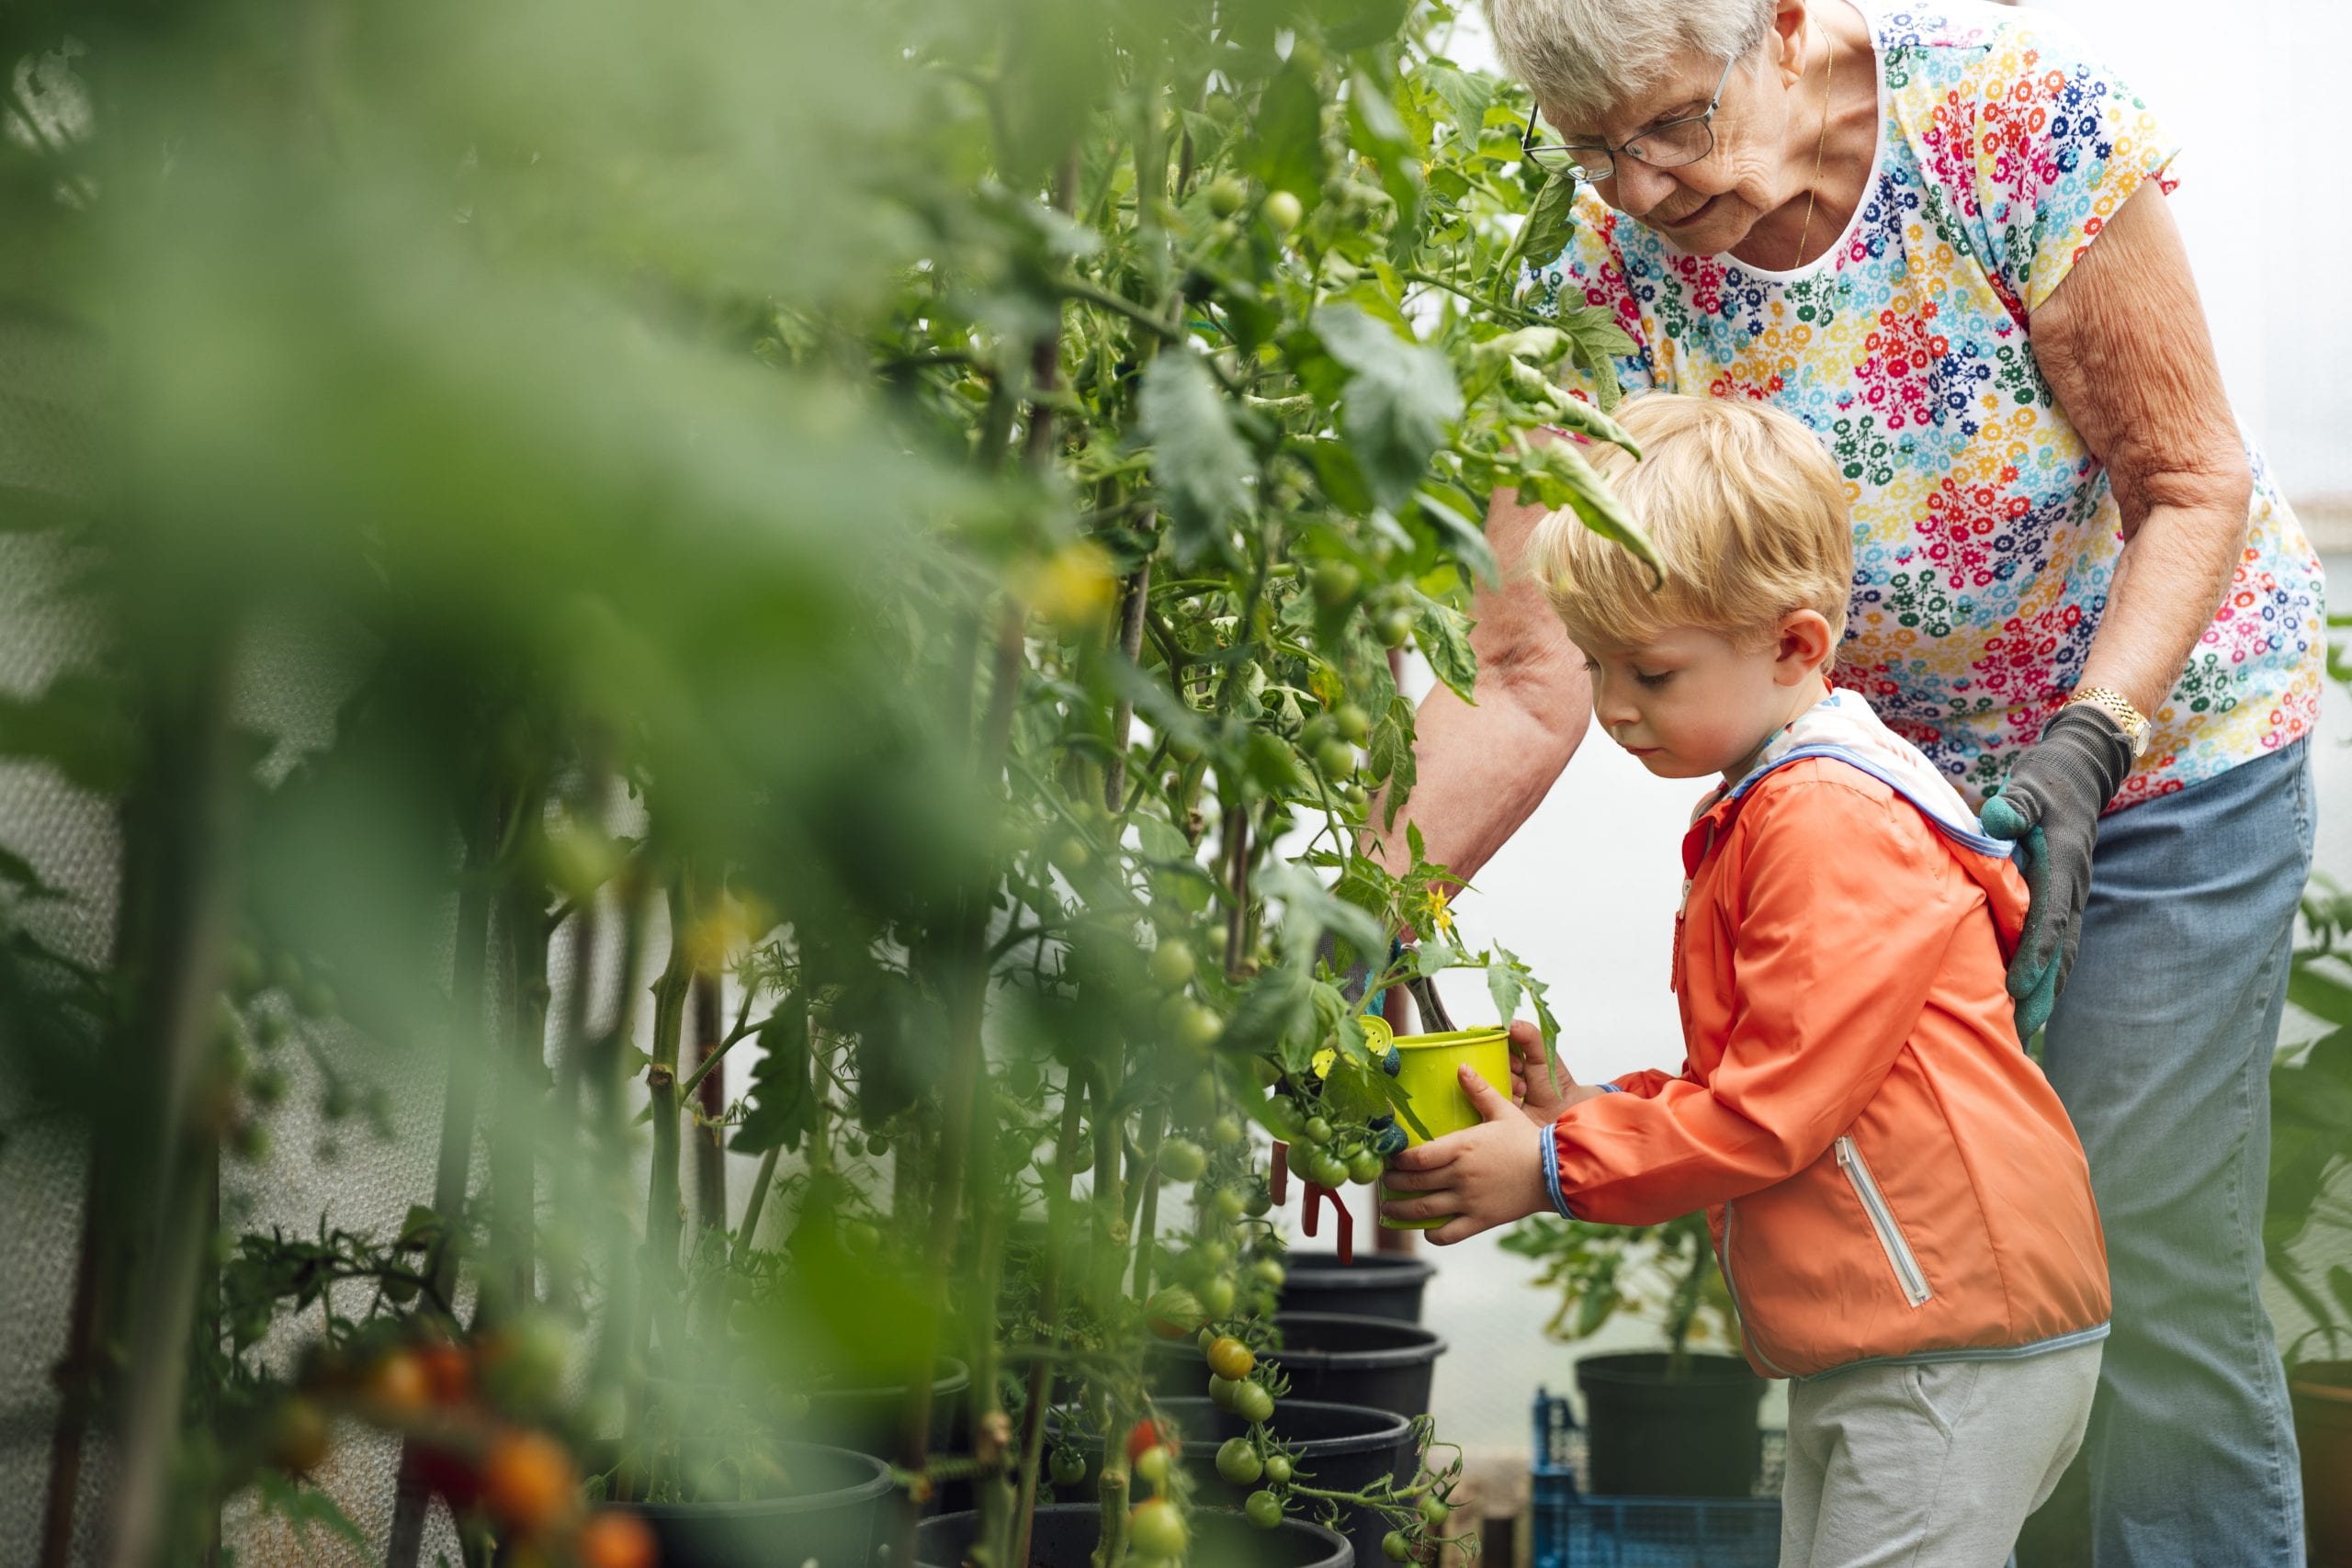 An older woman and toddler tending to tomato plants